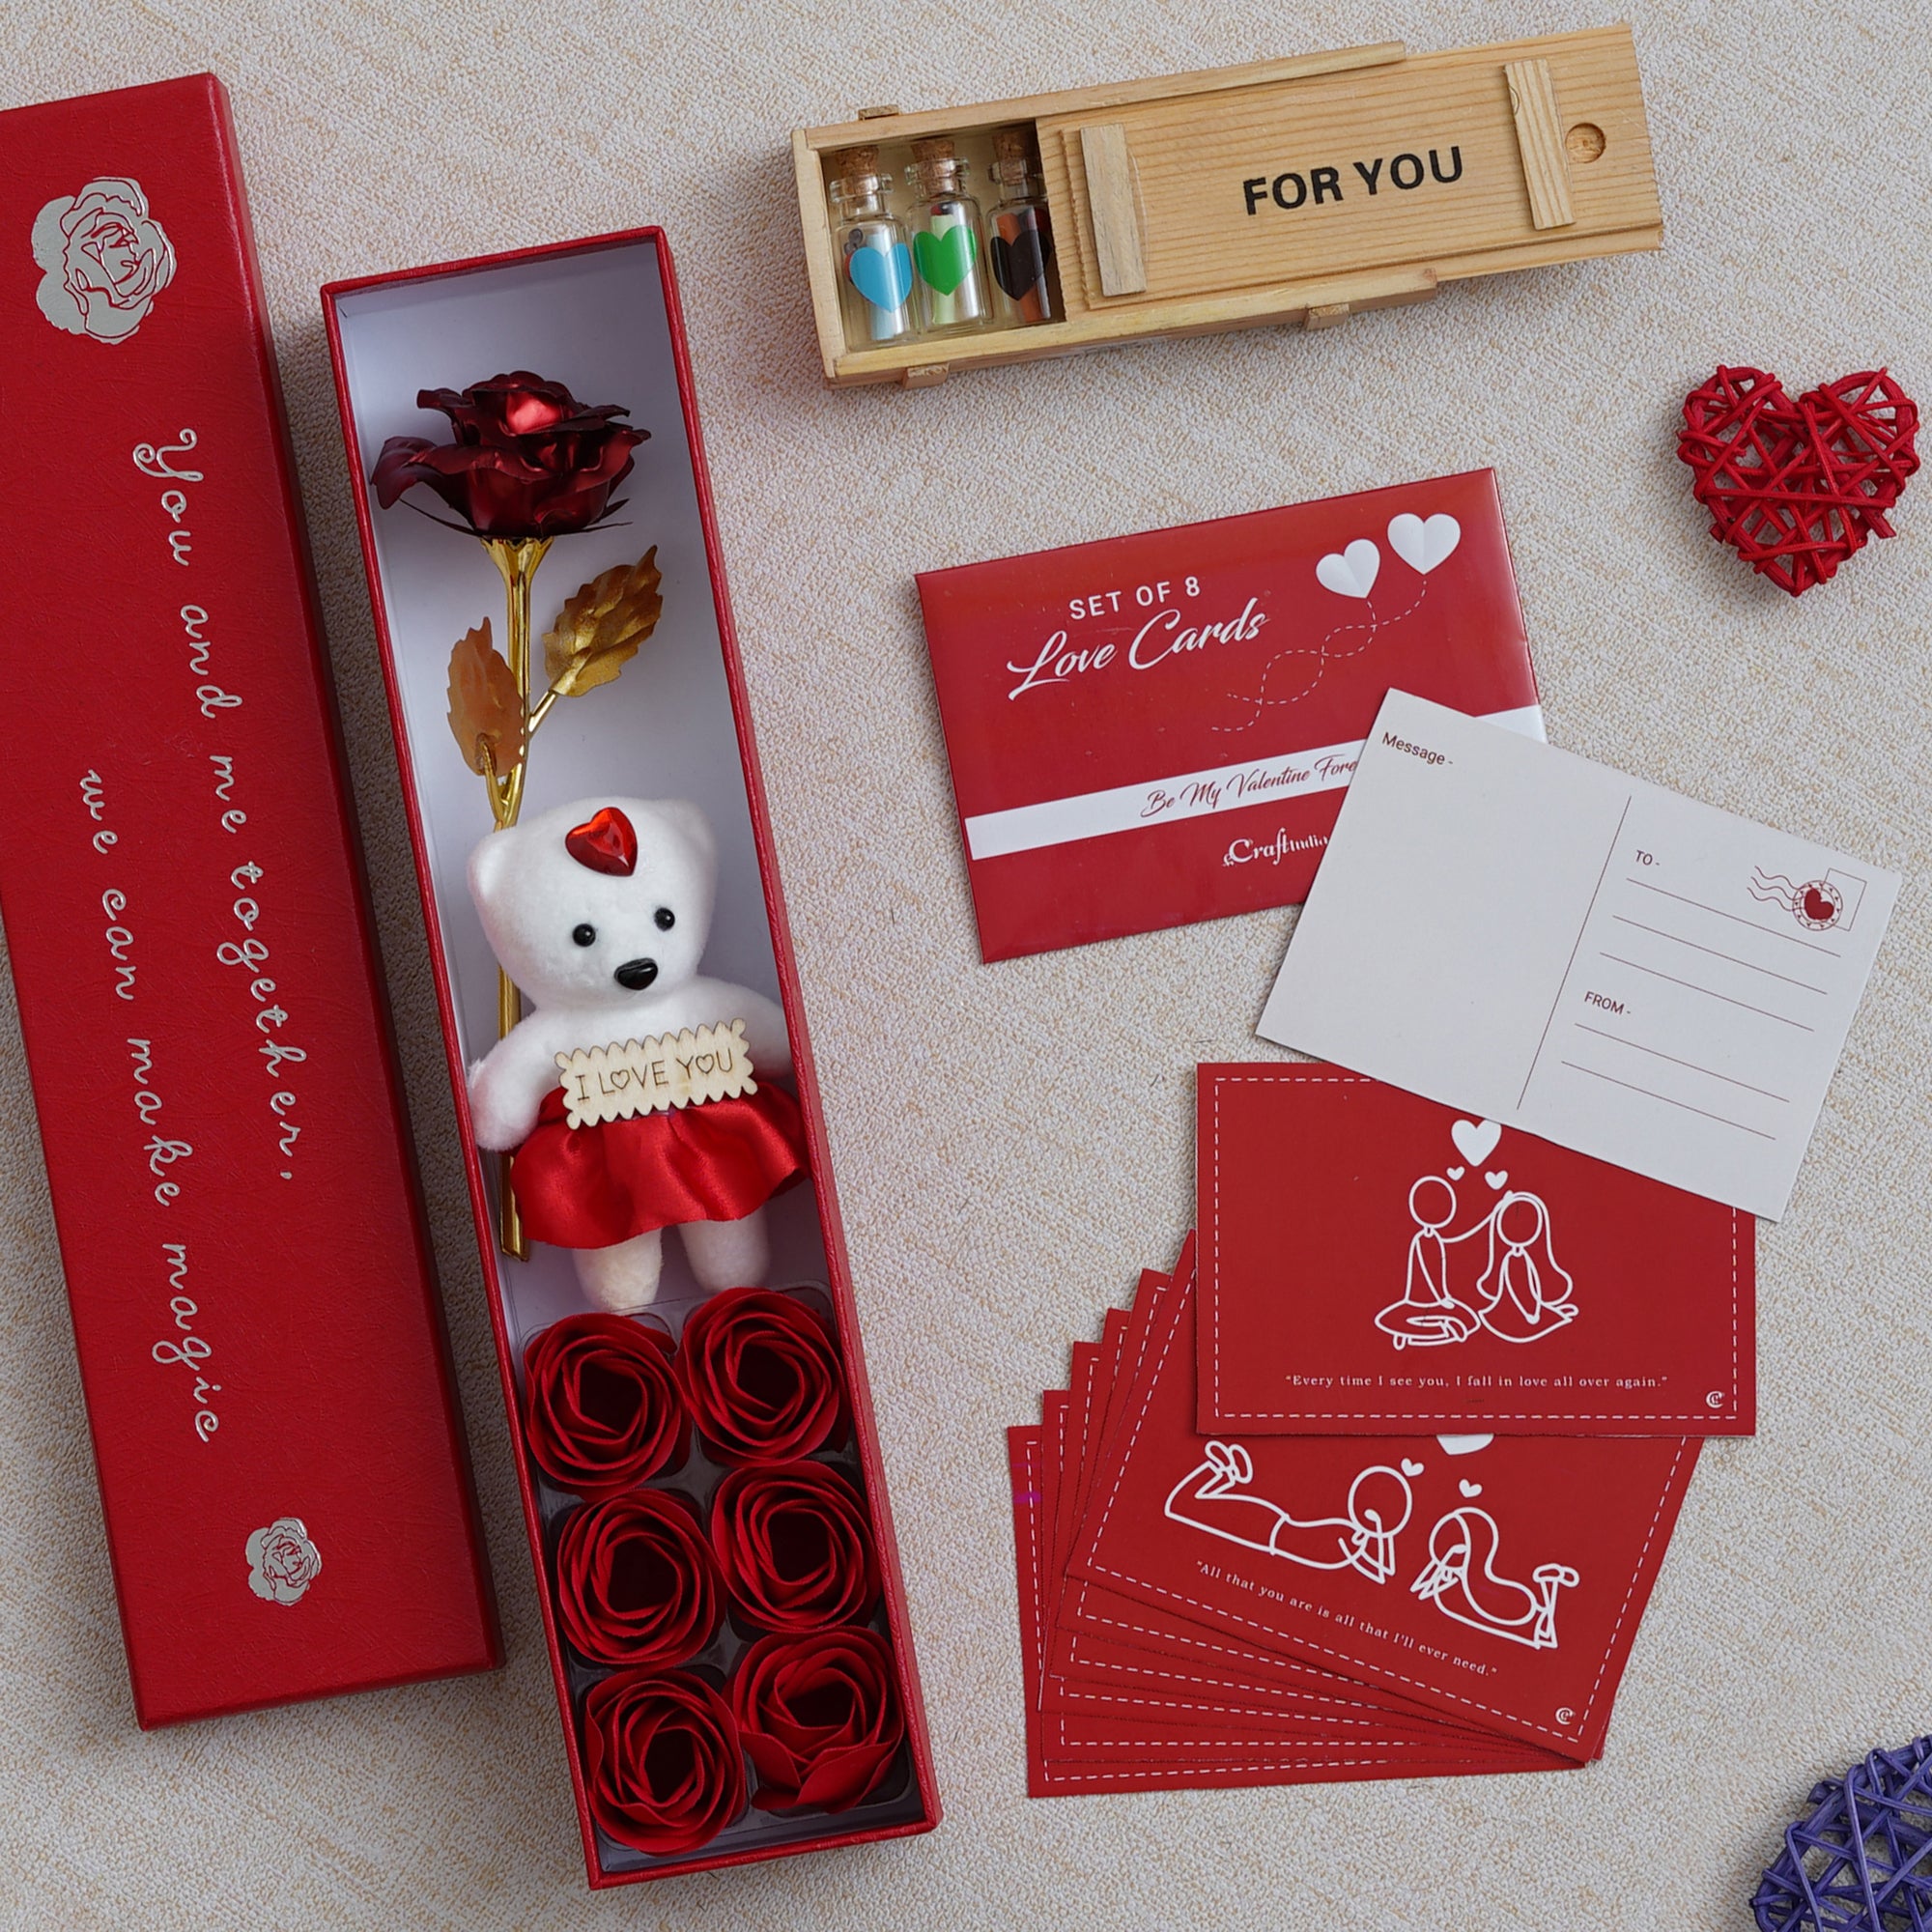 Valentine Combo of Set of 8 Love Post Cards Gift Cards Set, Red Gift Box with Teddy & Roses, Wooden Box "For You" Message Bottle Set